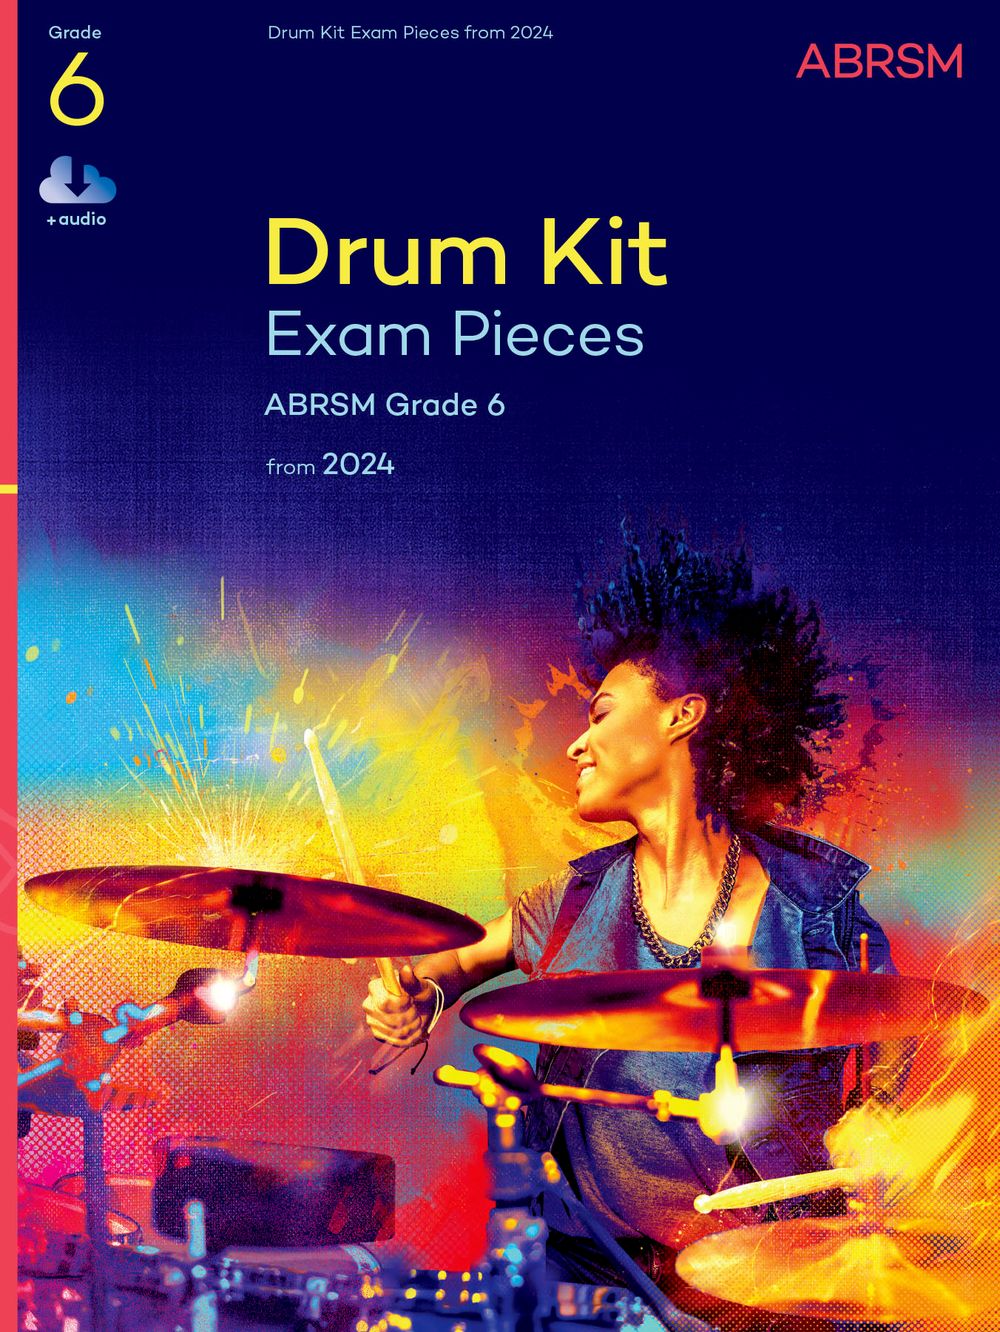 Drum Kit Exam Pieces From 2024 Grade 6 Abrsm Sheet Music Songbook